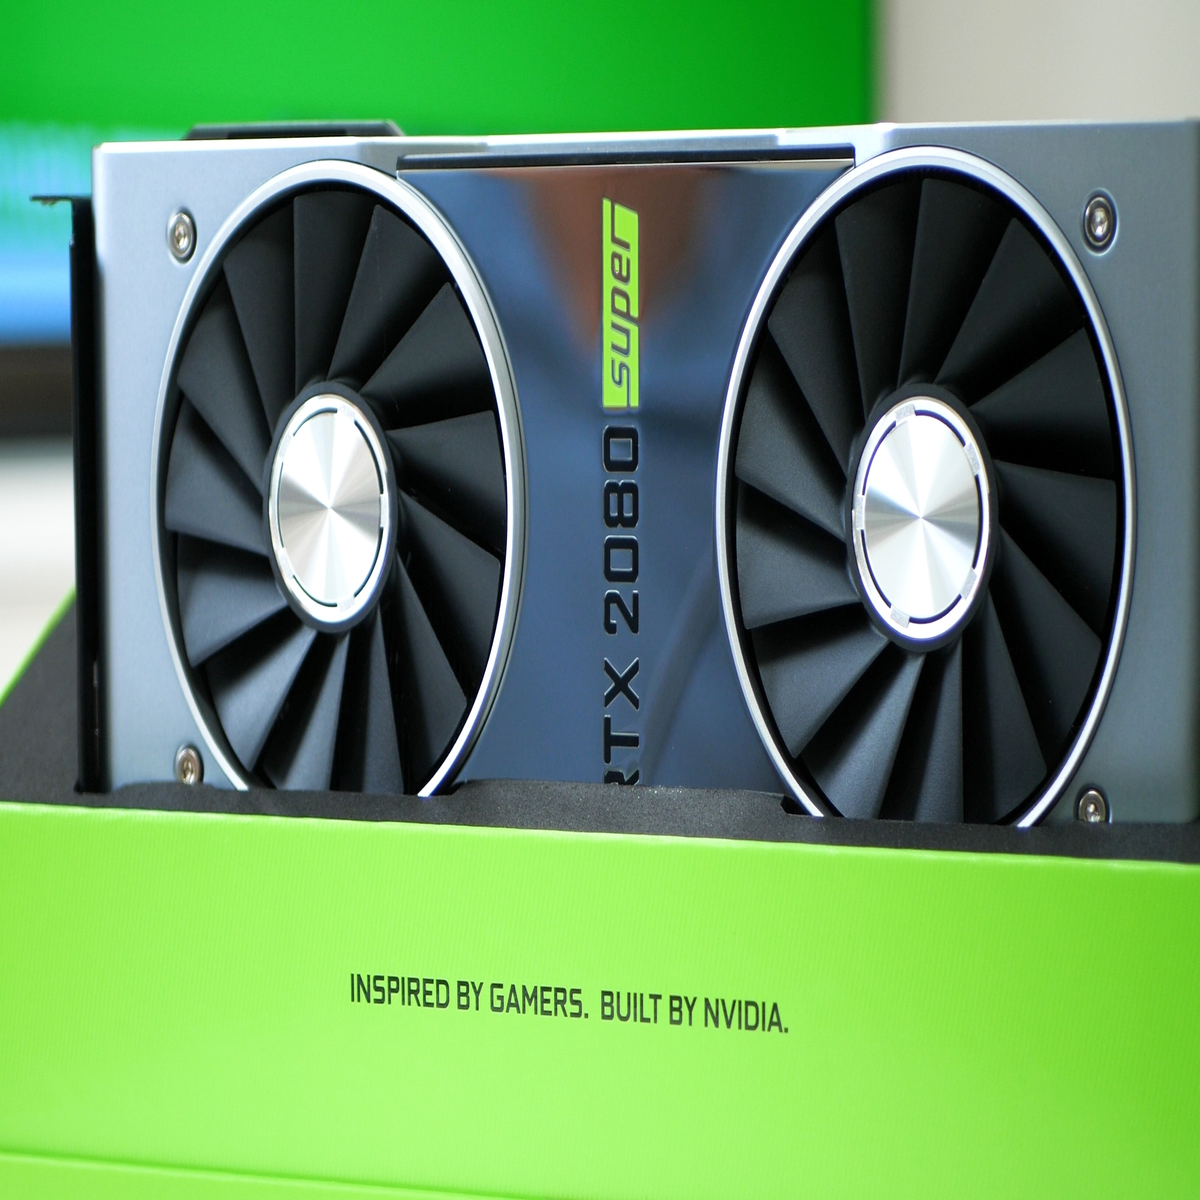 GeForce RTX 2080 SUPER Out Now: More Cores, Higher Clocks, Faster Memory, GeForce News